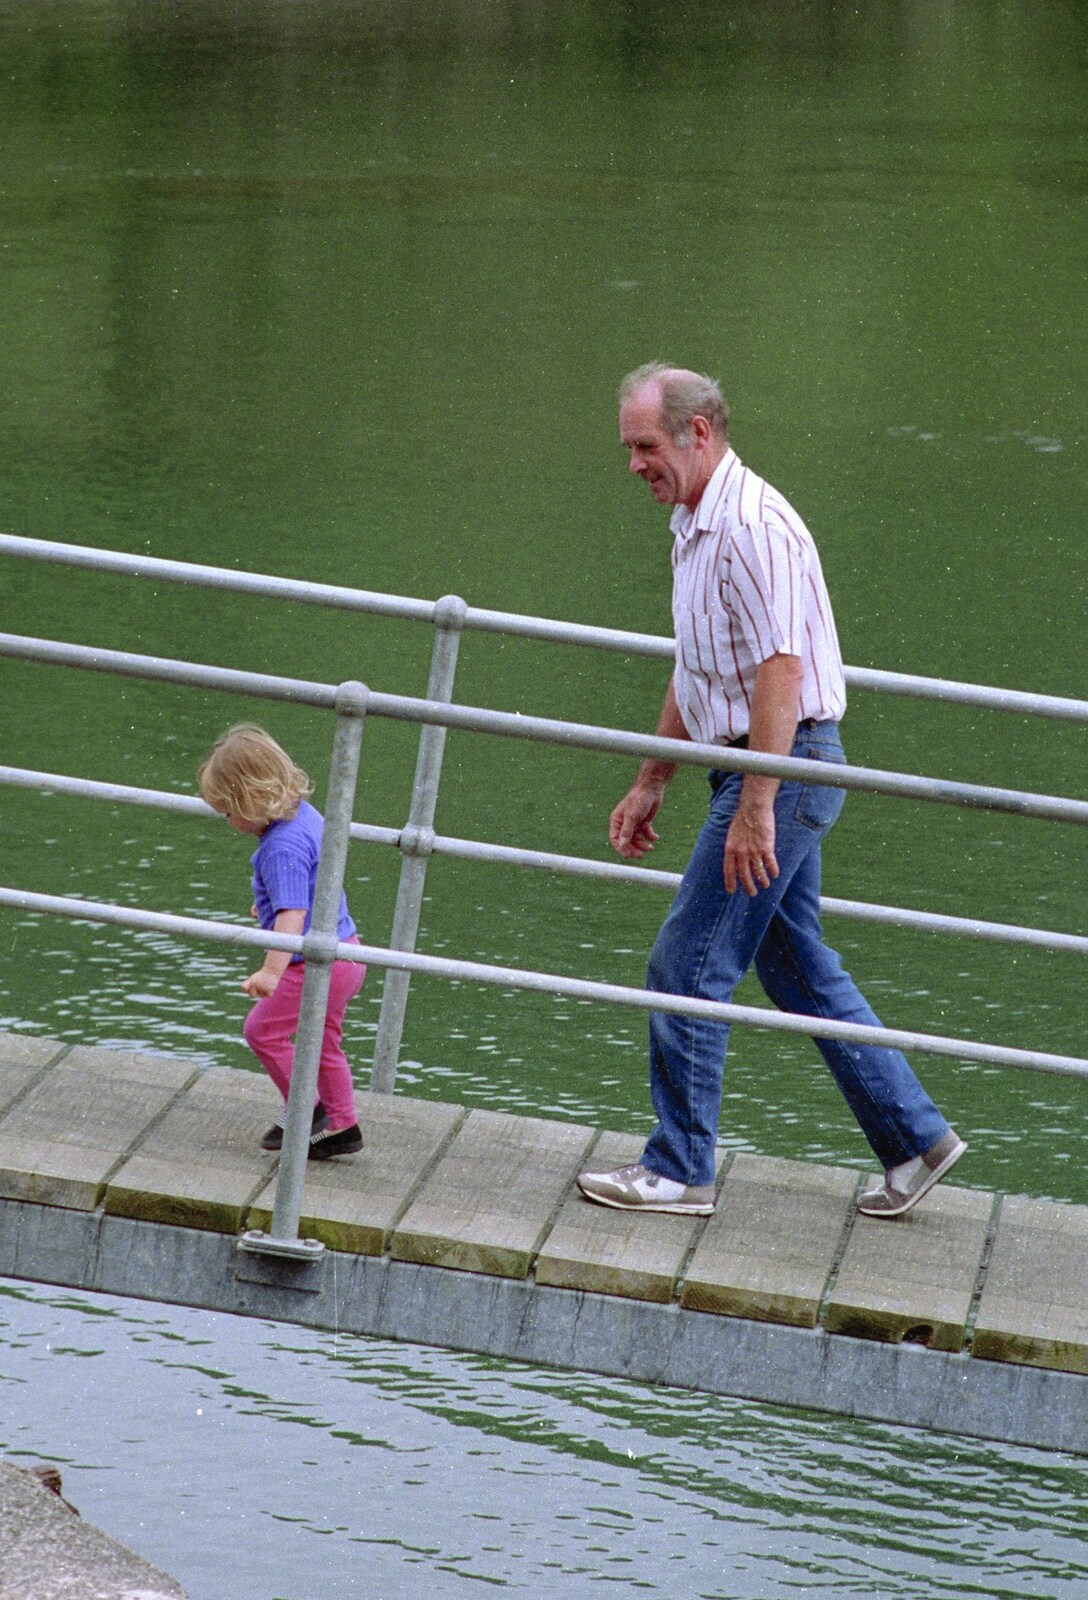 Clive chases his granddaughter from Ferry Landing, Whitianga, New Zealand - 23rd November 1992